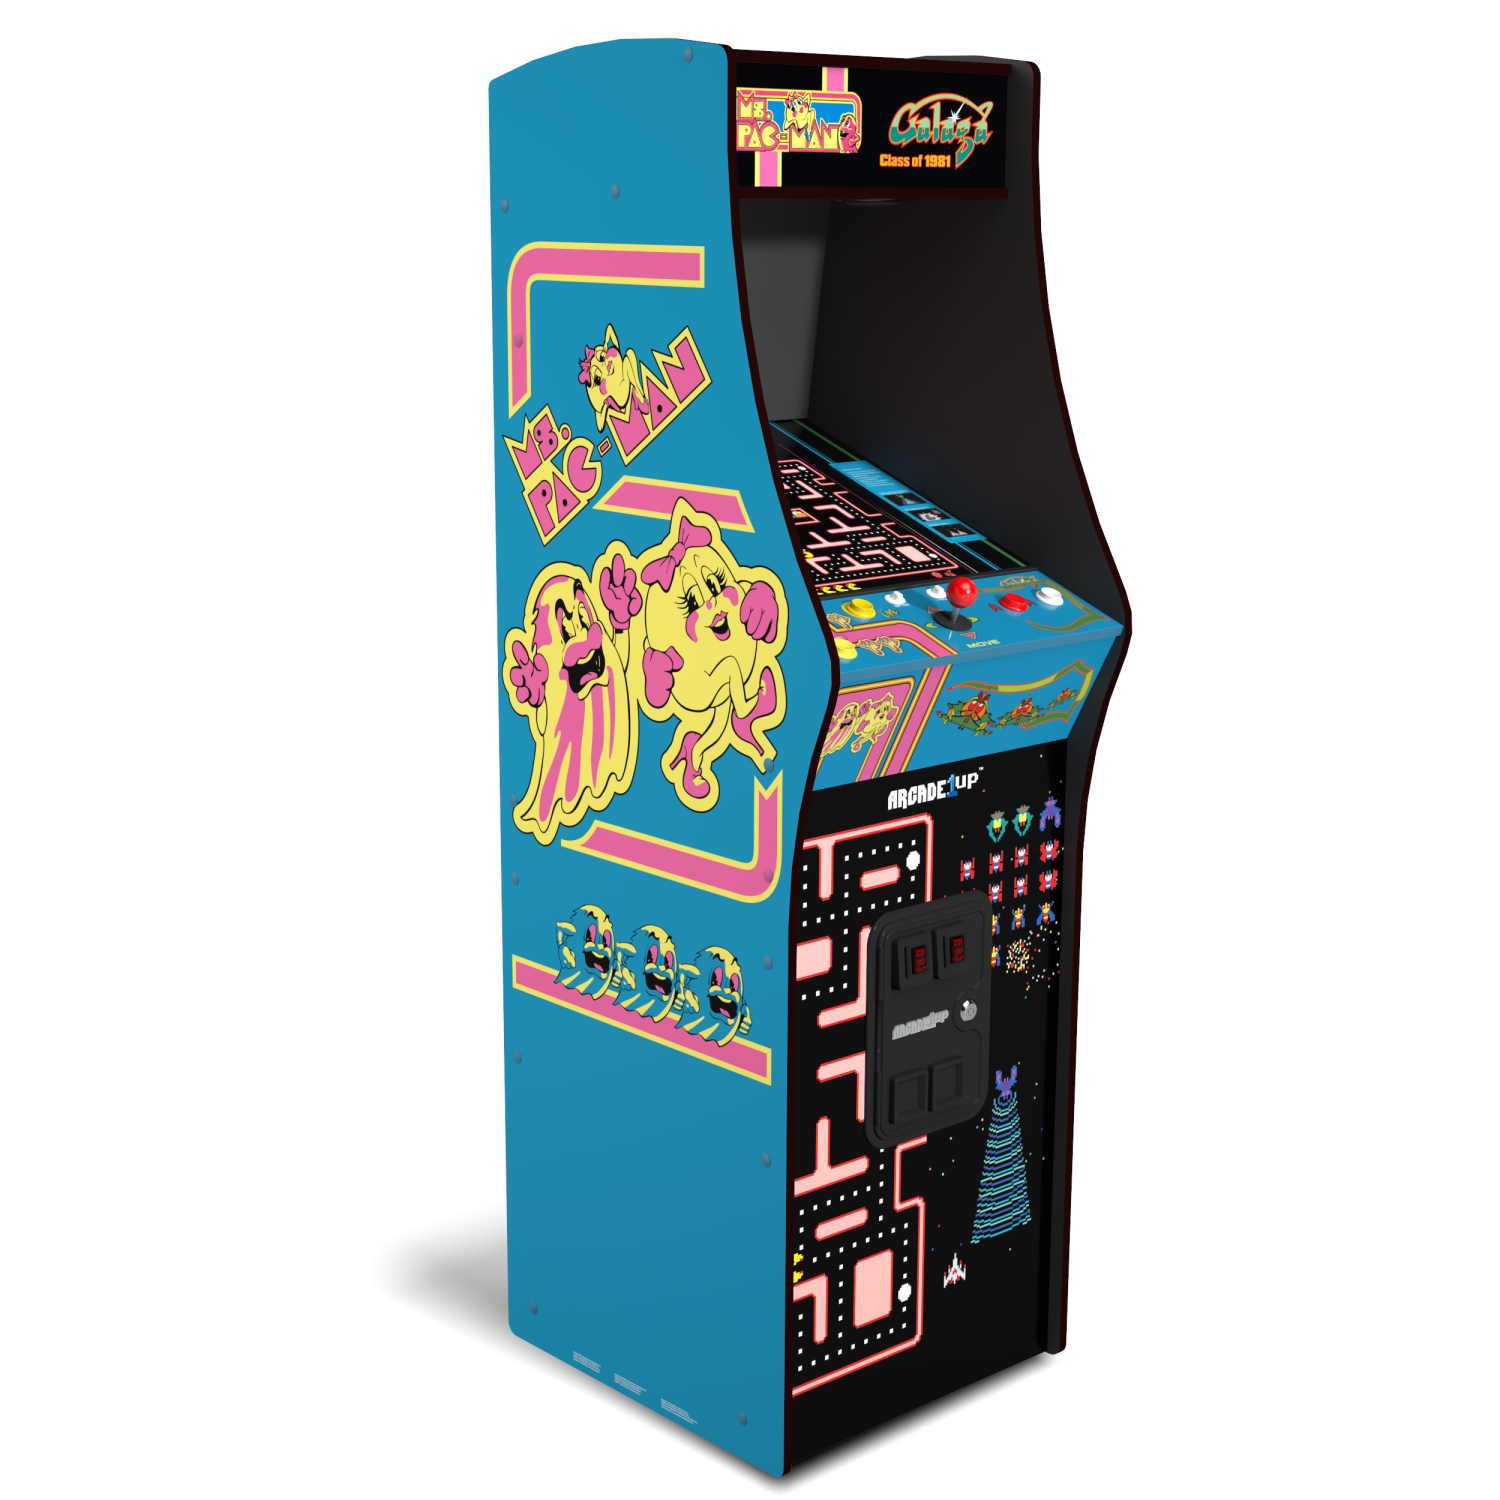 ARCADE 1 UP MS. PAC-MAN VS GALAGA CLASS OF 81 DELUXE ARCADE MACHINE